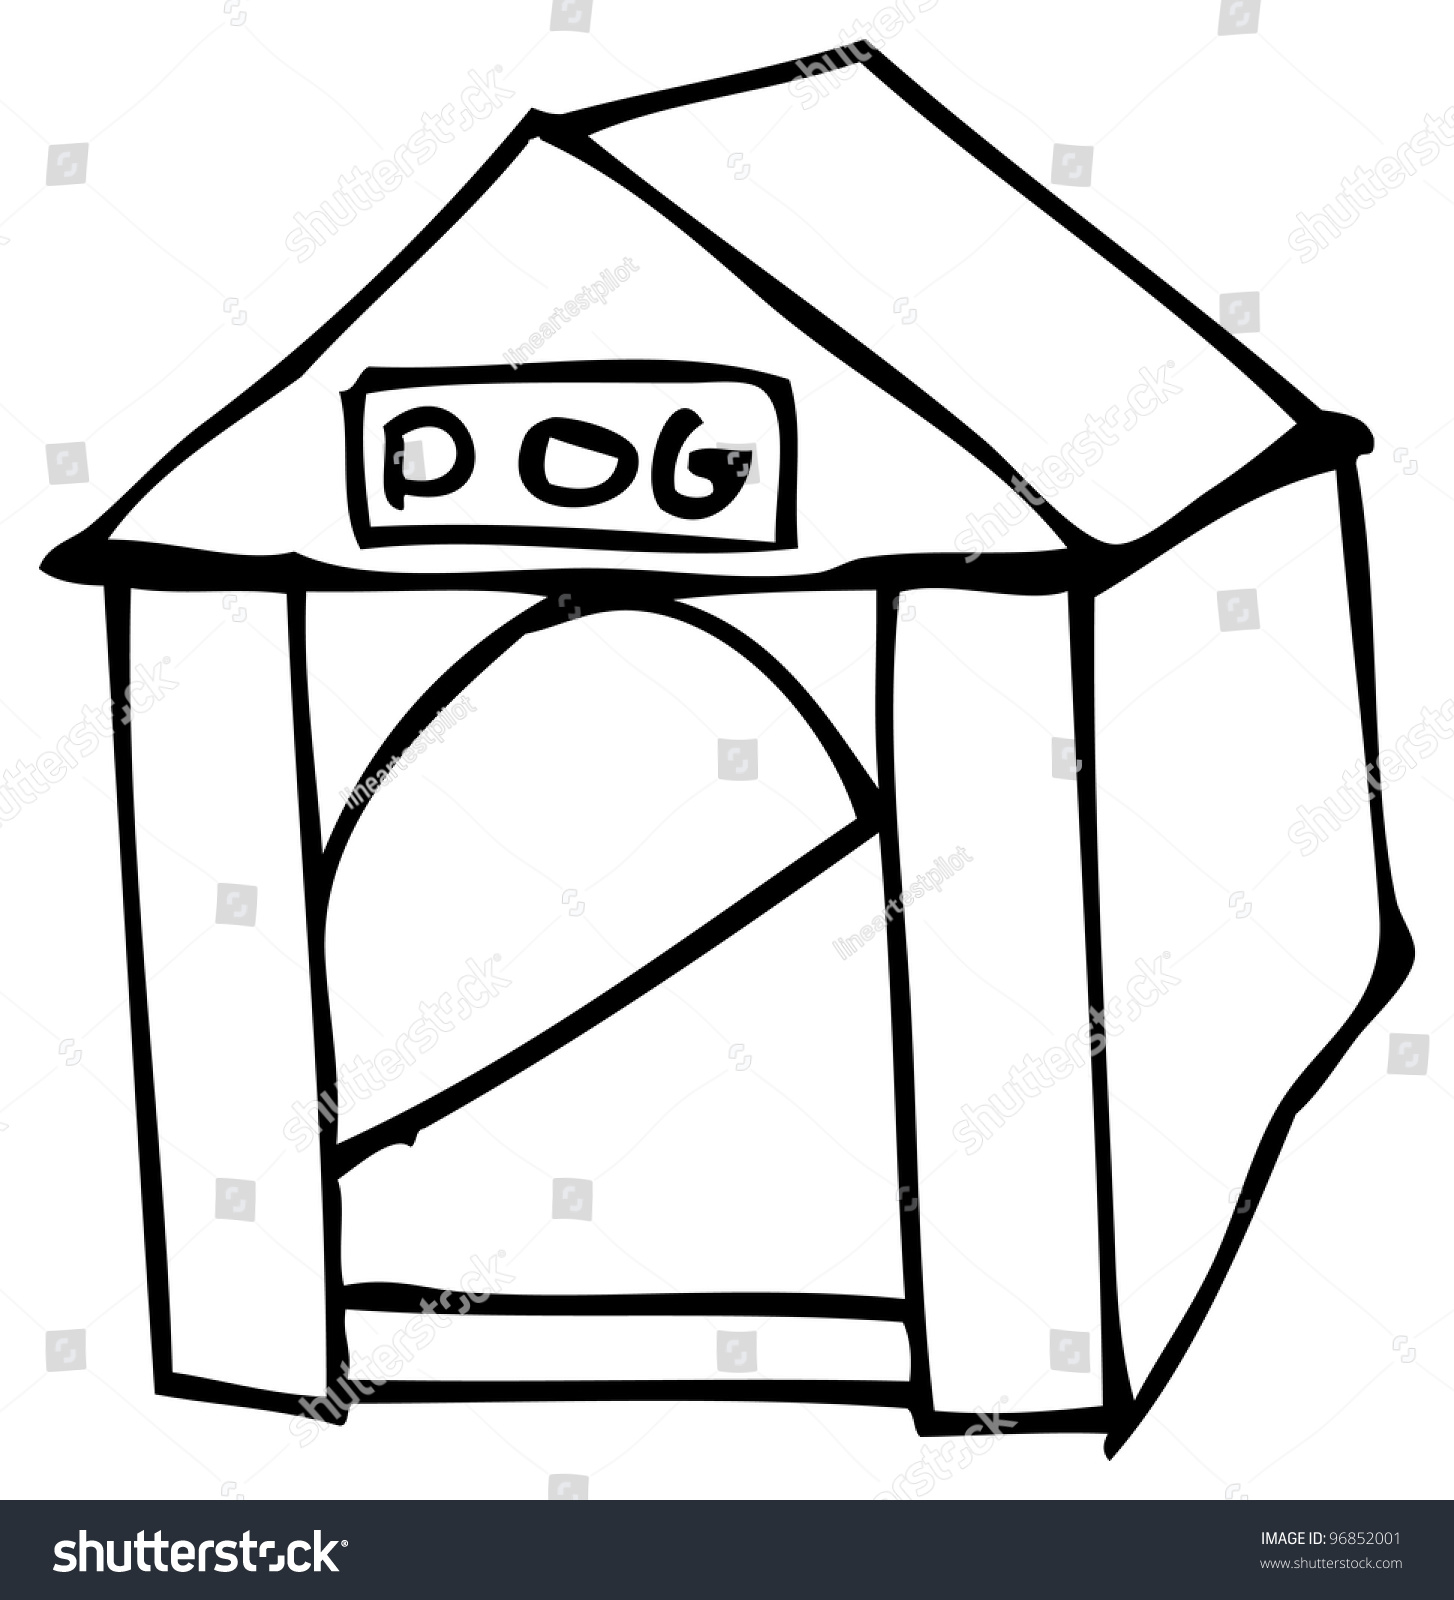 dog kennel clipart - photo #47